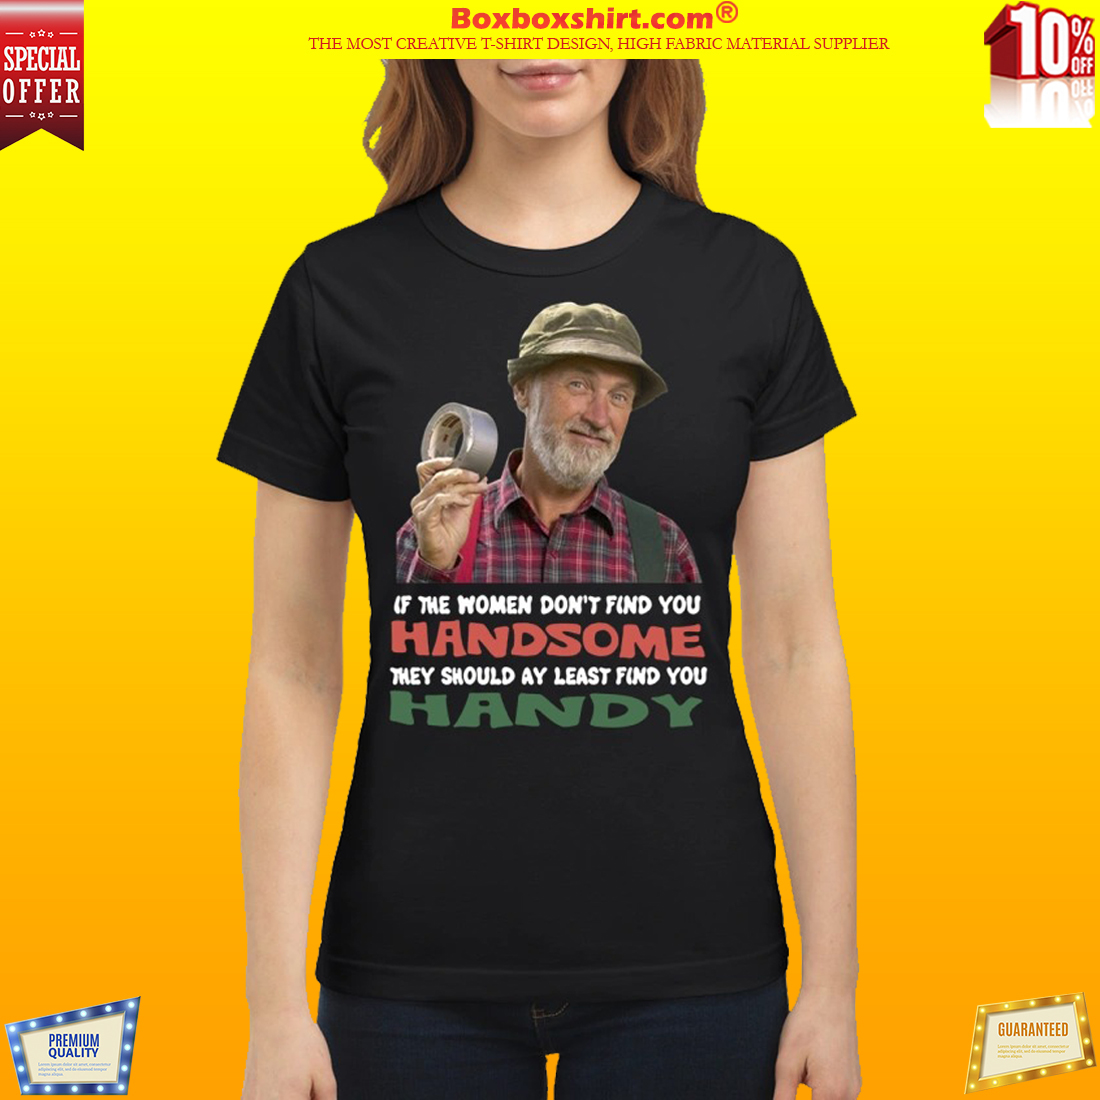 Red green show if they don't find you handsome classic shirt